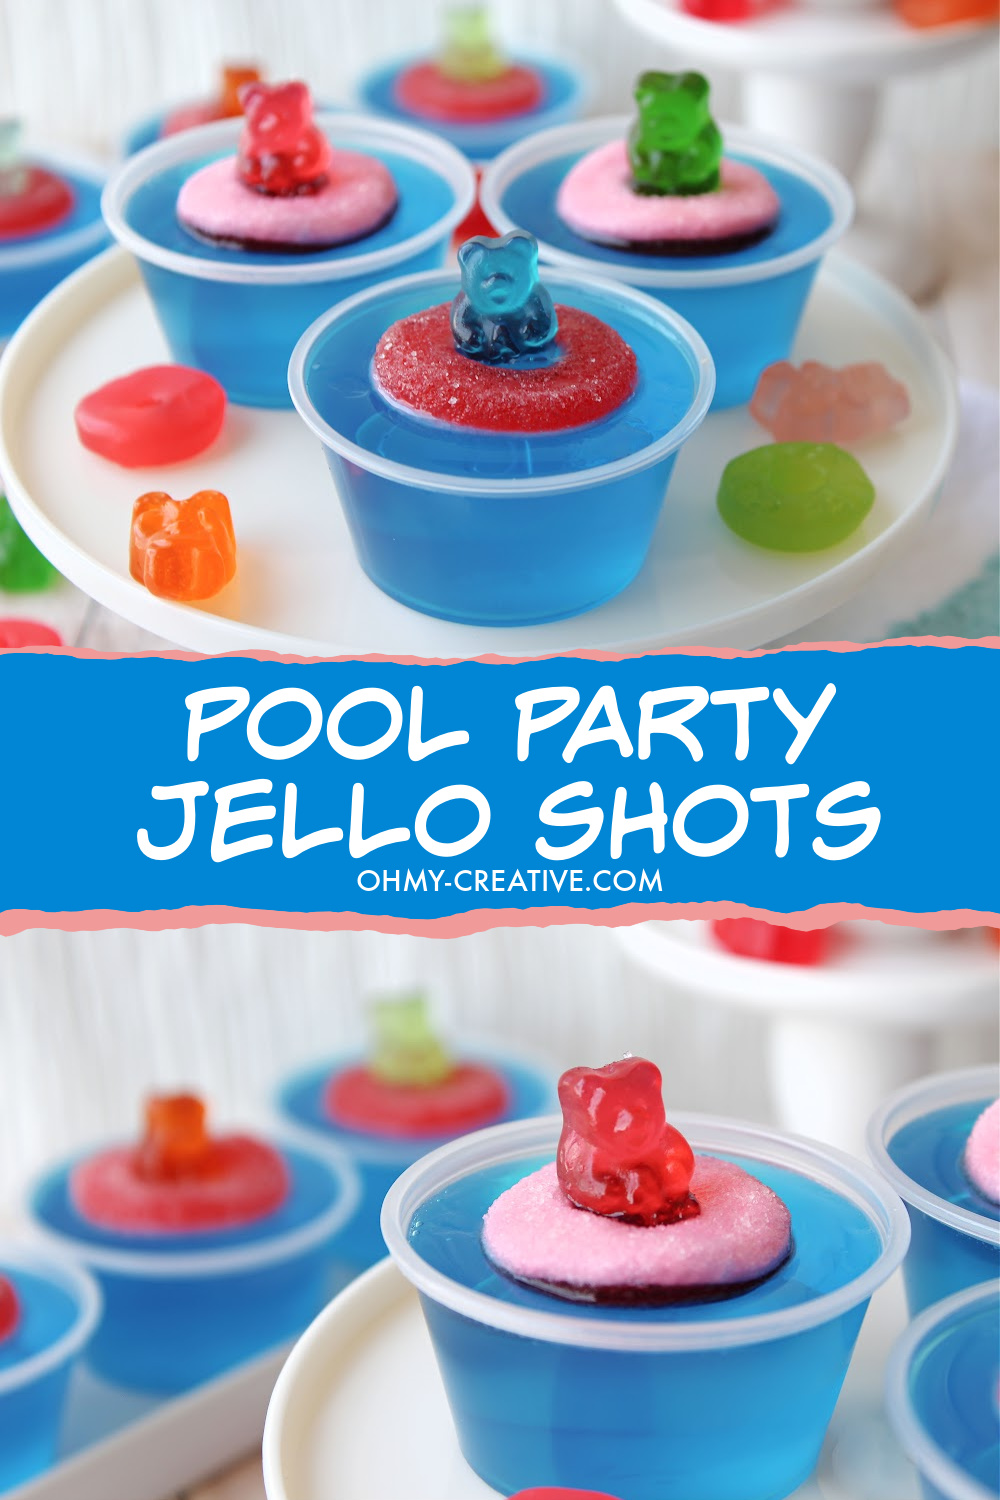 Blue jello shots made with gummy pool floats and gummy bears.